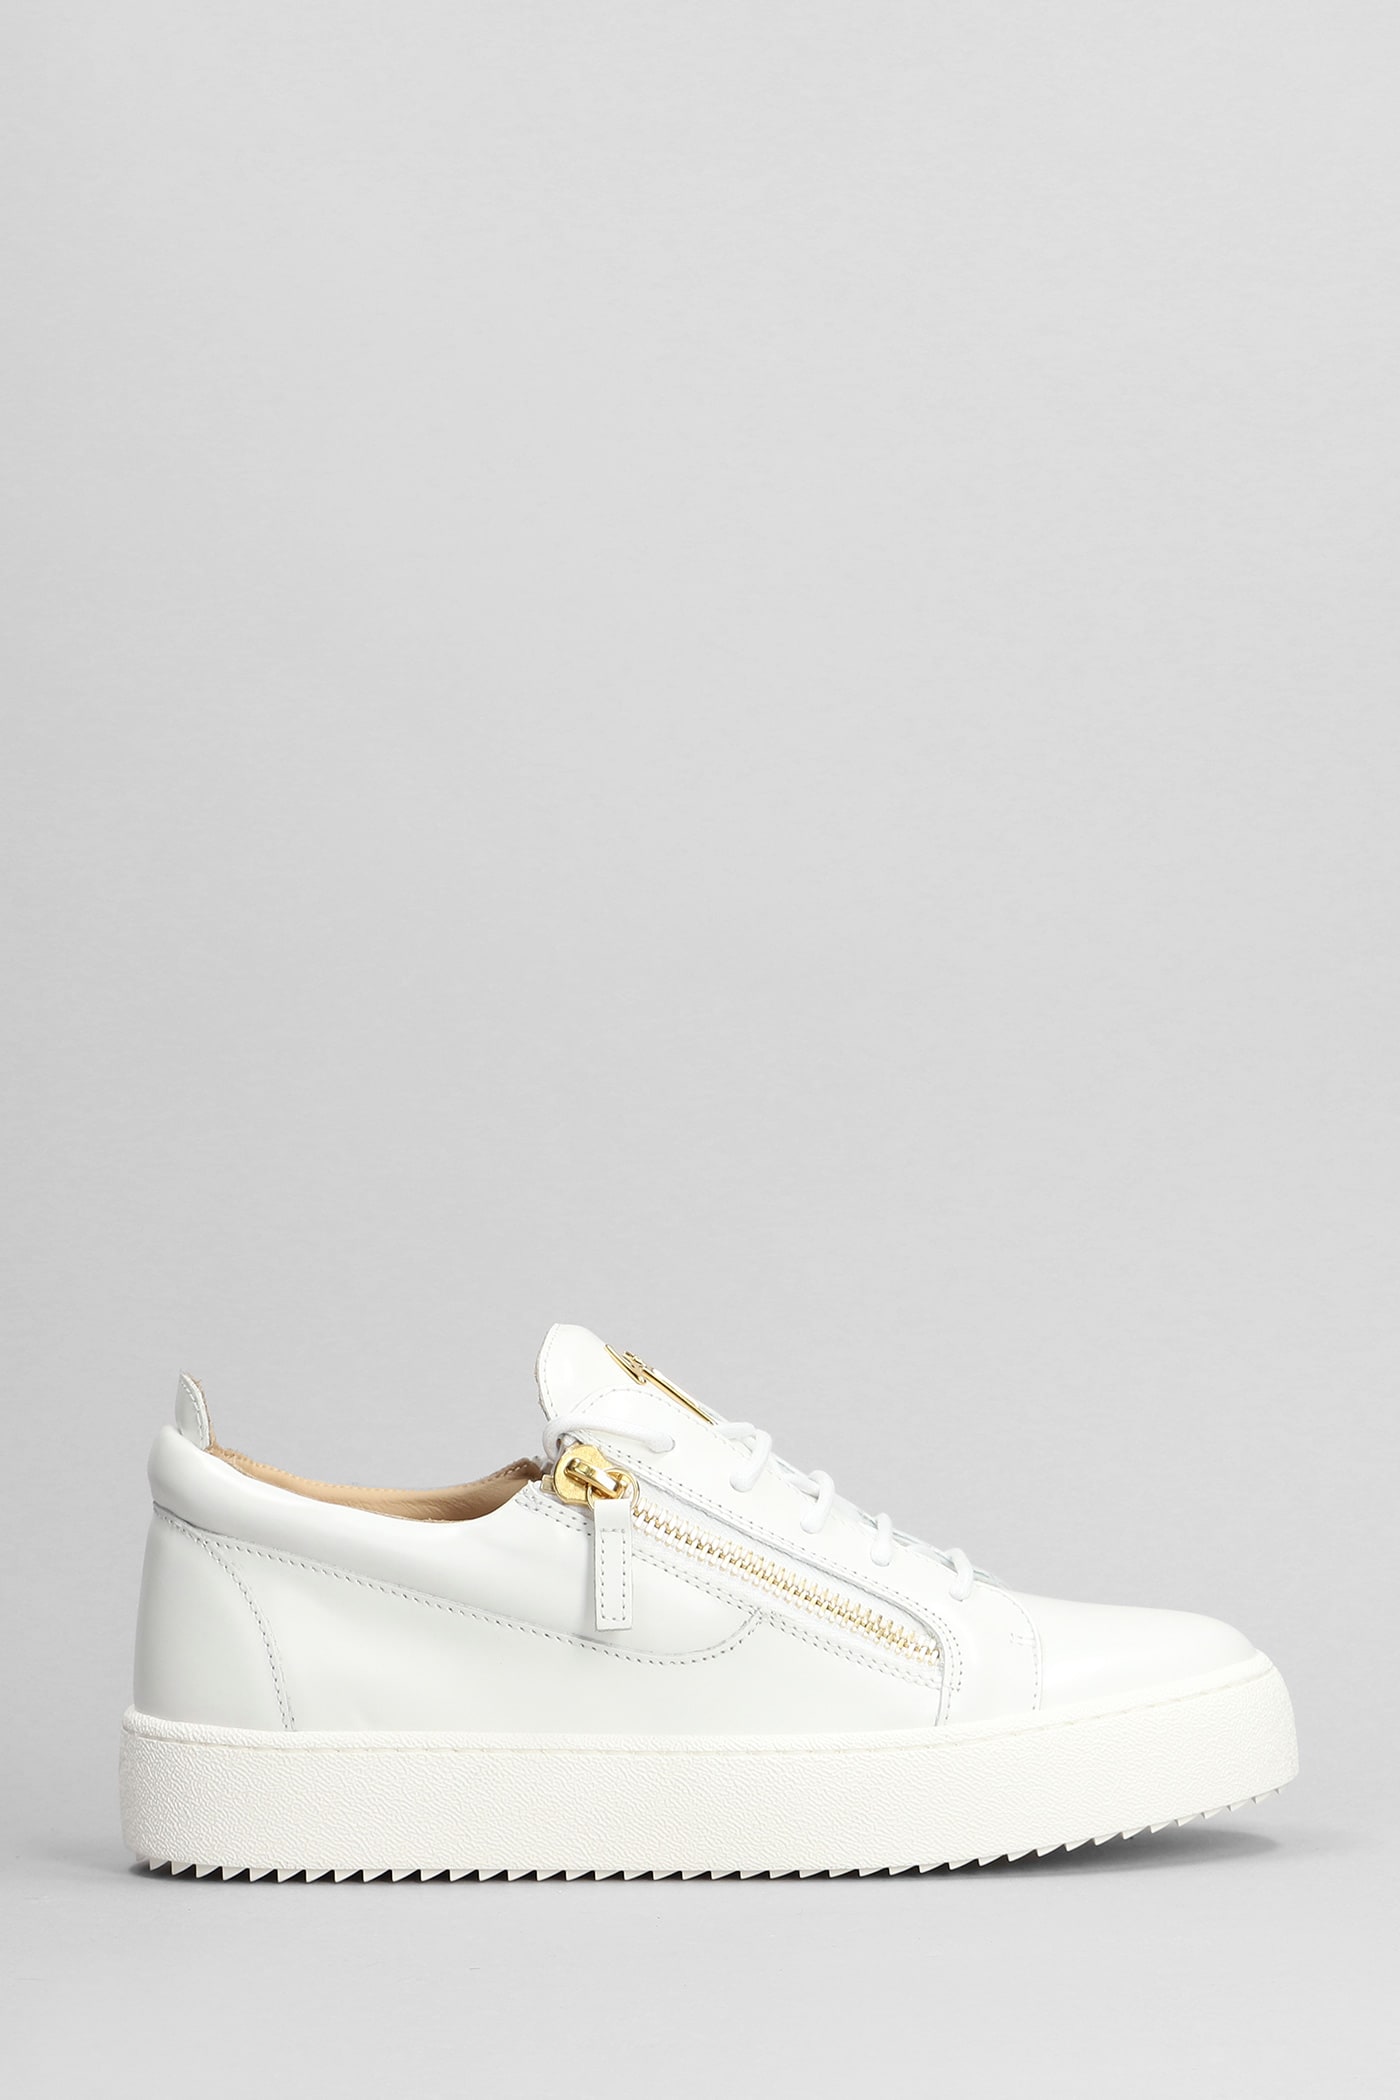 Frankie Sneakers In White Patent Leather